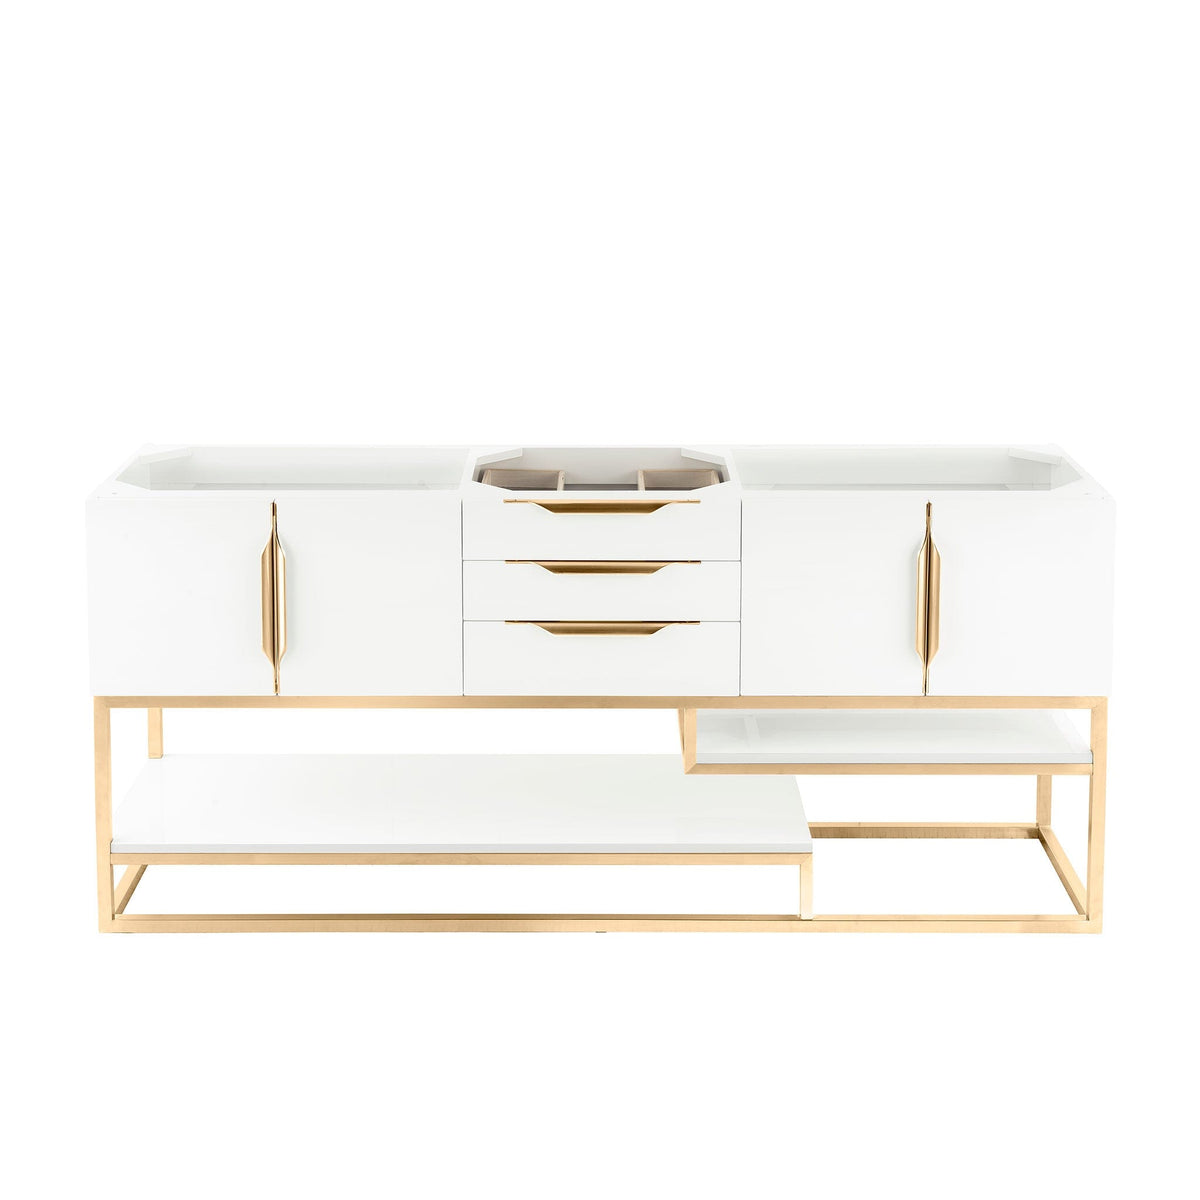 72" Columbia Double Bathroom Vanity, Glossy White w/ Radiant Gold Base and Glossy White Composite Stone Top